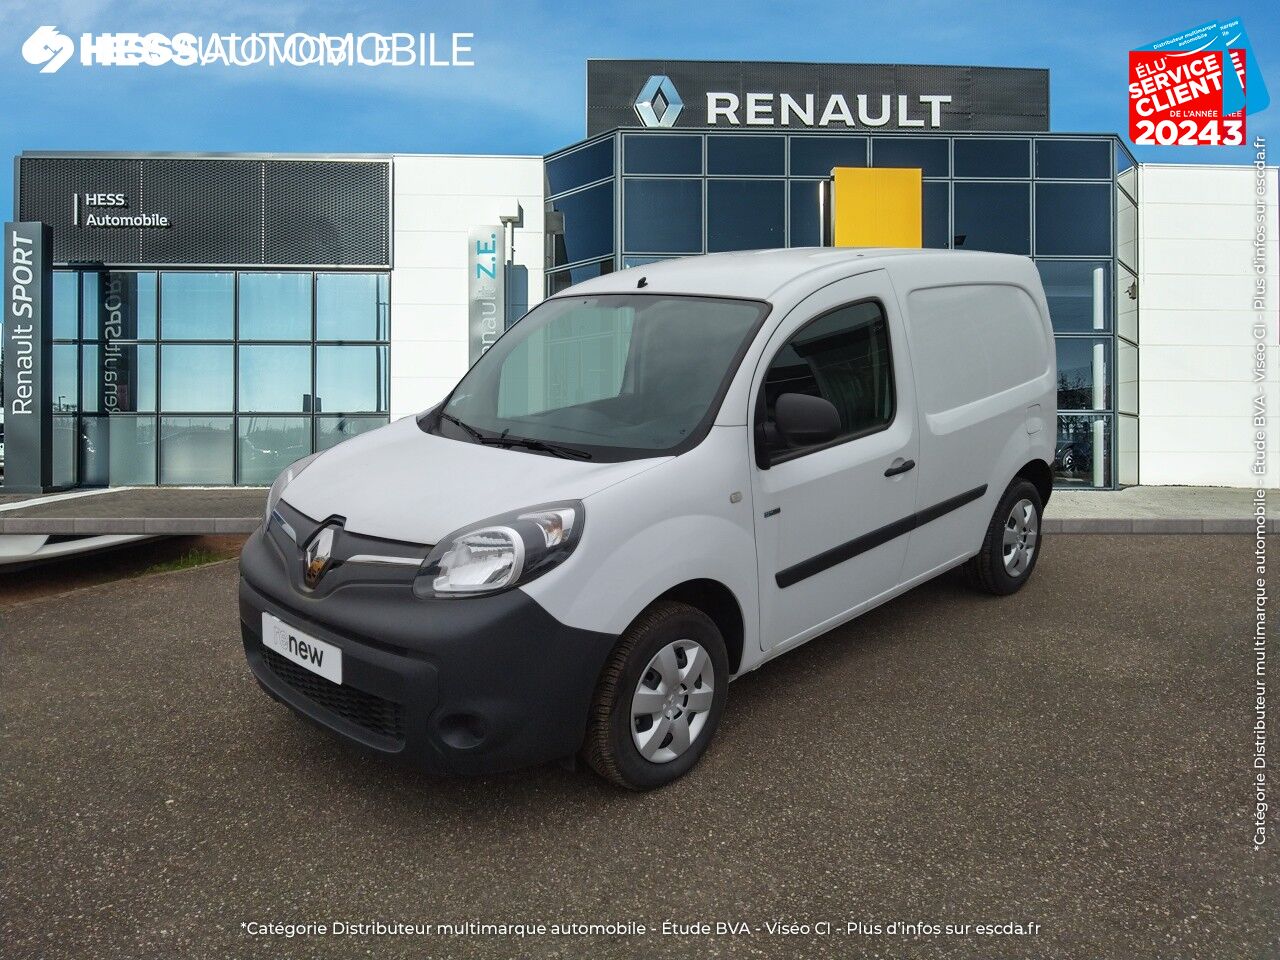 RENAULT KANGOO EXPRESS ELECTRIQUE EXTRA R-LINK ACHAT INTEGRAL d'occasion -  HESS Automobile